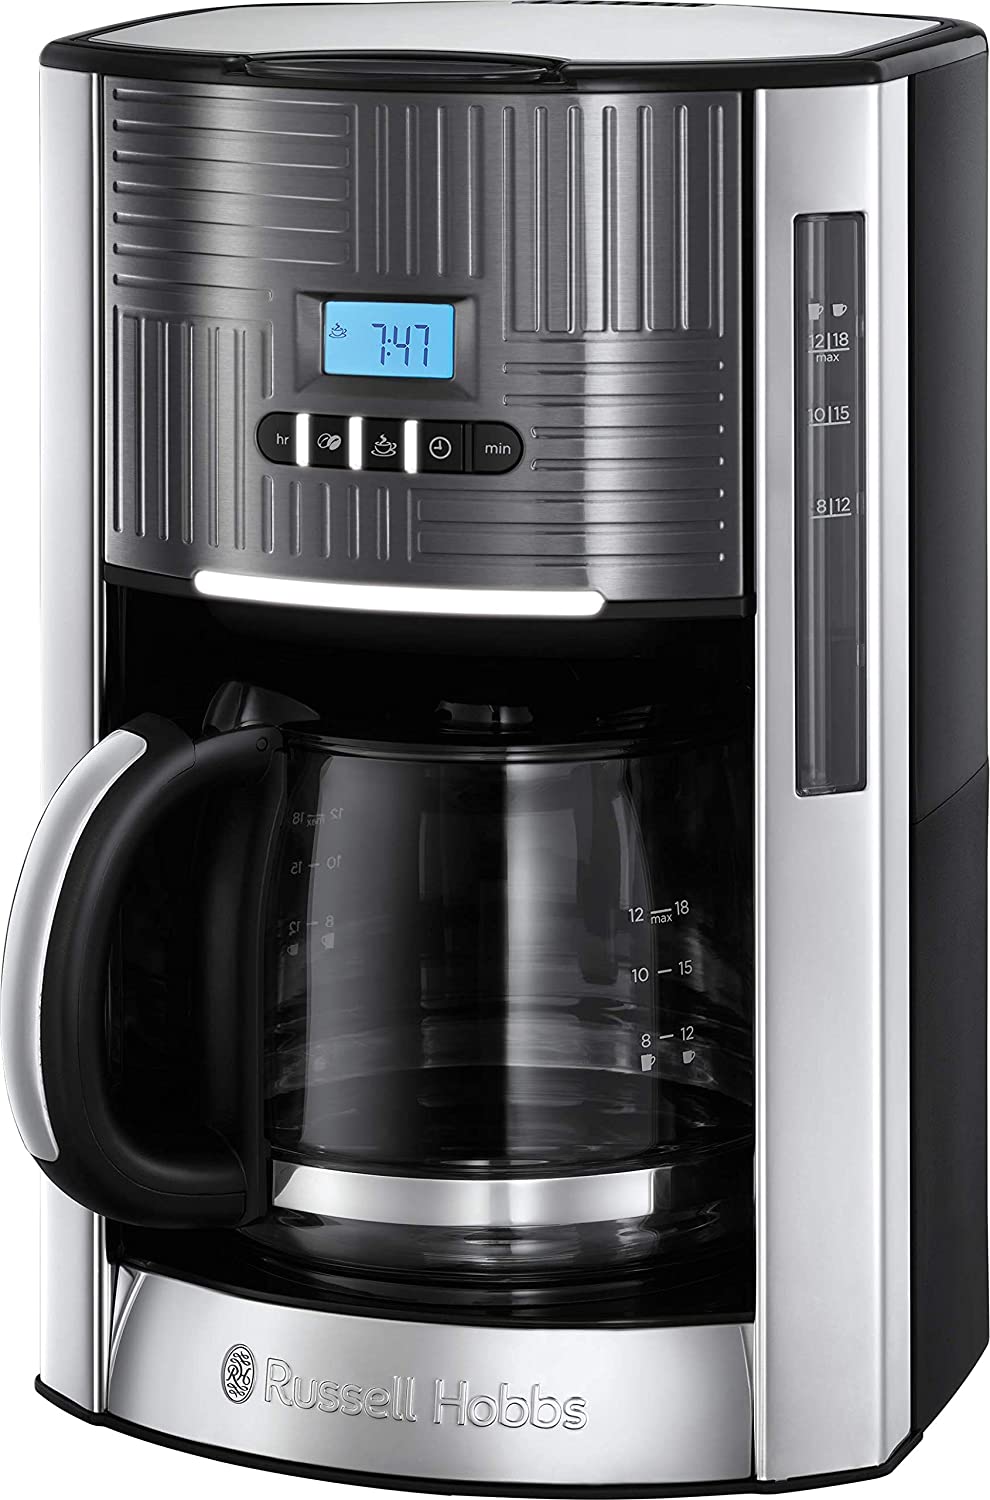 Russell Hobbs Digital Coffee Machine Stainless Steel Geo Grey Programmable Timer 1.5 L Glass Jug up to 12 Cups Warming Plate Automatic Shut-Off 1000 W Filter Coffee Machine 25270-56